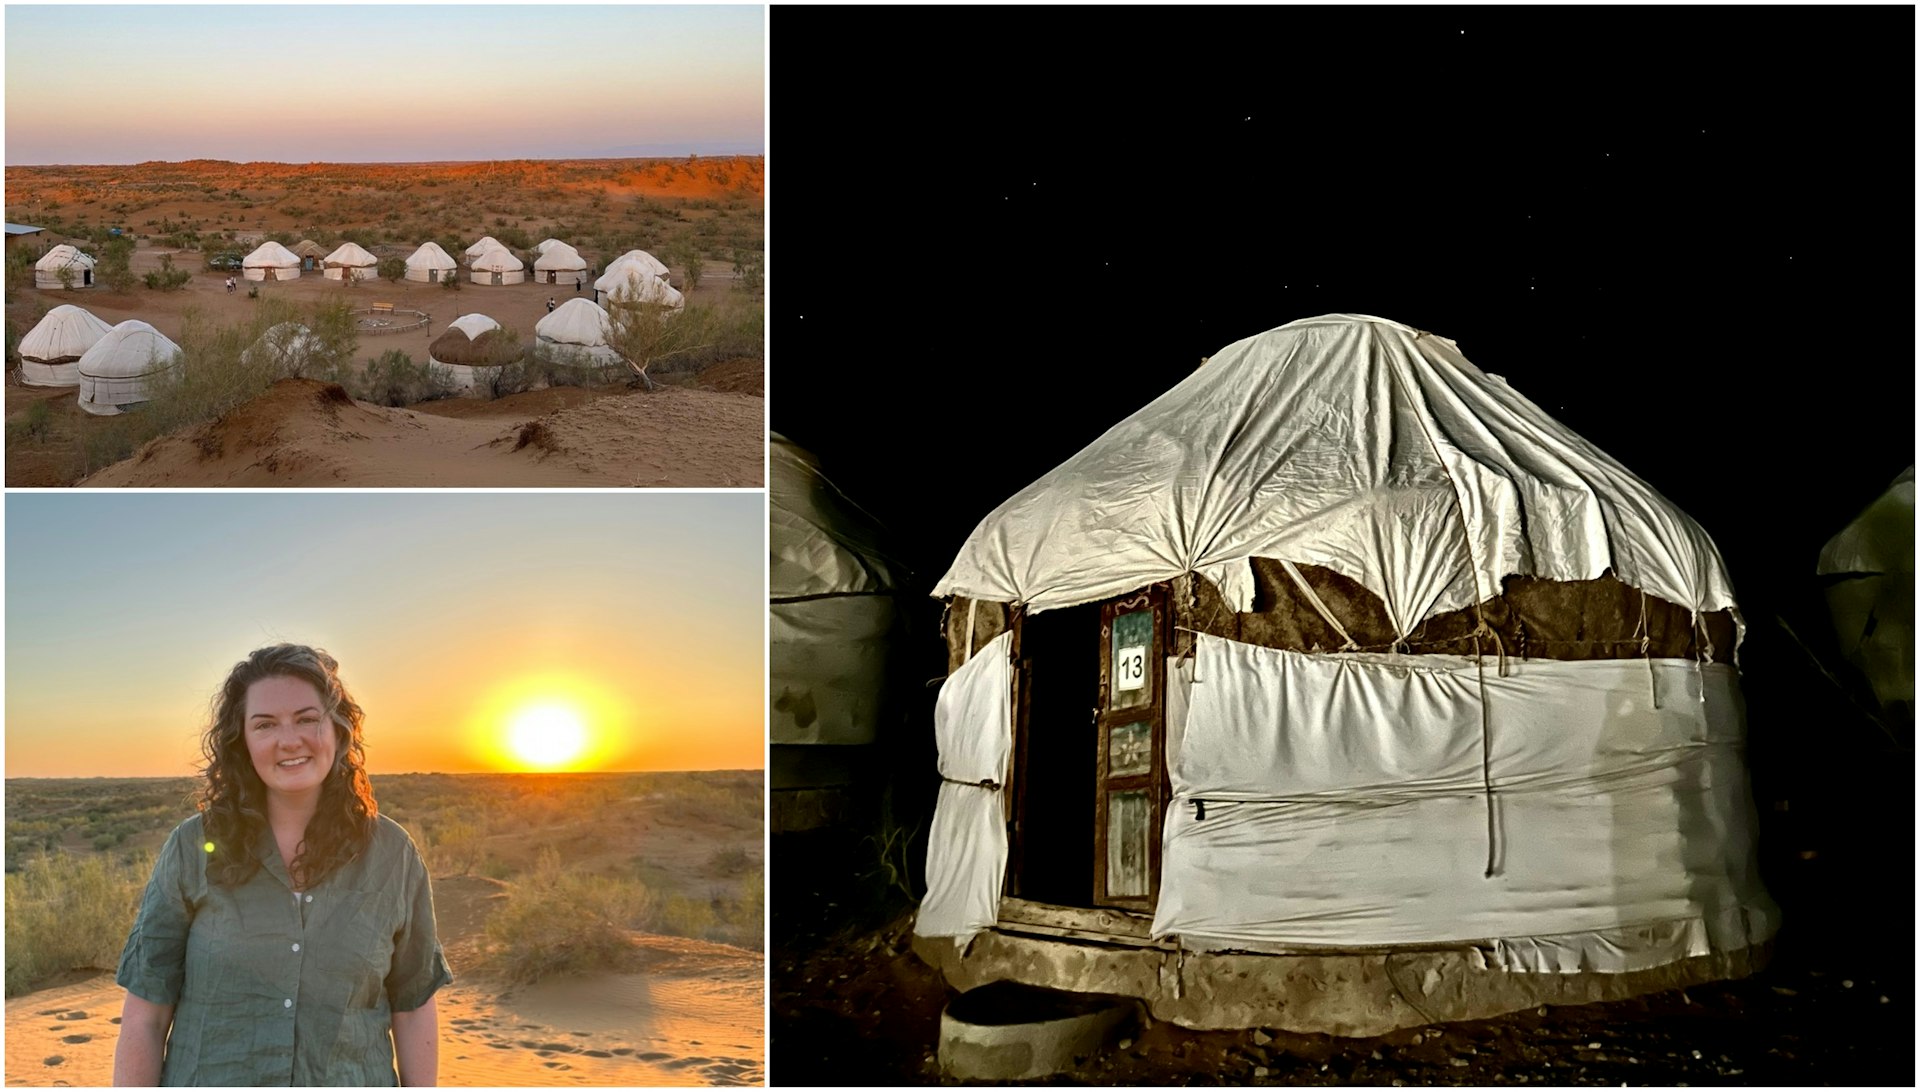 A collage of images show a yurt camp in the desert, a woman looking at the camera in front of the sunset and a yurt at night. 